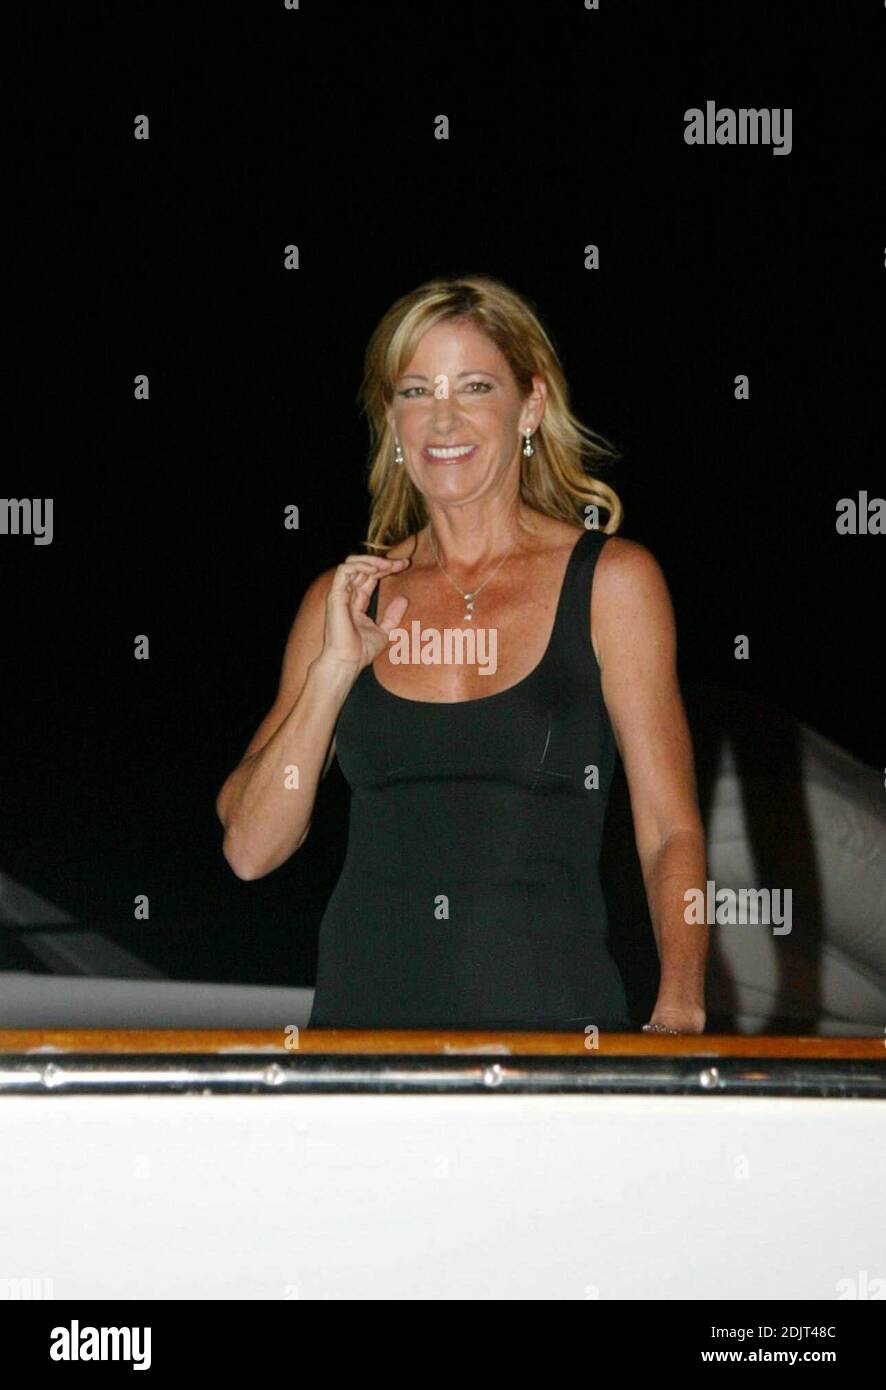 Chris Evert and participants of the Chris Evert/Raymond James Pro-Celebrity Tennis Classic go for a yacht cruise following the Classic Cocktail Party presented by Fed Ex/Kinko's at Boca Raton Resort & Club Garden Pool, FL. Celebrities attending included Greg Norman, Gavin Rossdale, Maeve Quinlan, John Evert, Frederique, Alan Thicke and Jon Lovitz. 11/03/06 Stock Photo